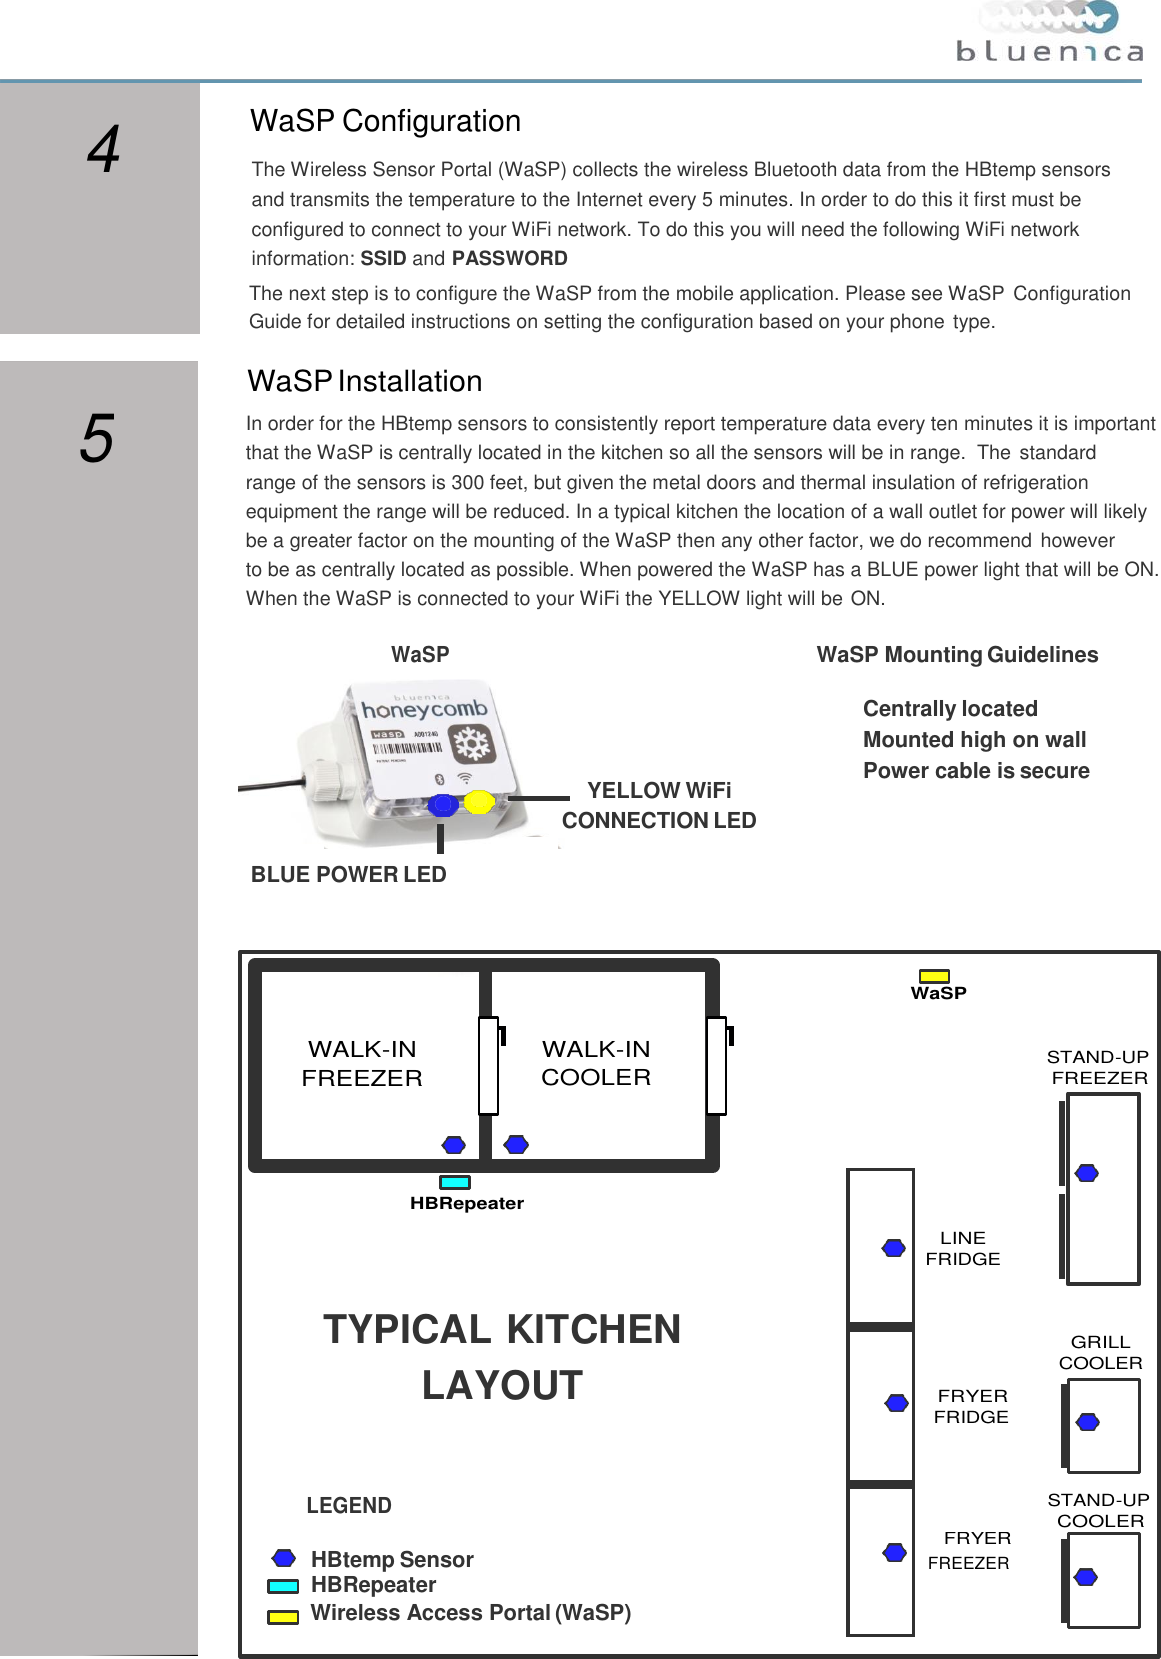     WALK-IN FREEZER Centrally located Mounted high on wall Power cable is secure YELLOW WiFi CONNECTION LED BLUE POWER LED WaSP WALK-IN COOLER STAND-UP FREEZER HBRepeater LINE FRIDGE TYPICAL KITCHEN LAYOUT GRILL COOLER FRYER FRIDGE LEGEND STAND-UP COOLER FRYER HBtemp Sensor FREEZER HBRepeater Wireless Access Portal (WaSP)    WaSP Installation In order for the HBtemp sensors to consistently report temperature data every ten minutes it is important that the WaSP is centrally located in the kitchen so all the sensors will be in range.  The standard range of the sensors is 300 feet, but given the metal doors and thermal insulation of refrigeration equipment the range will be reduced. In a typical kitchen the location of a wall outlet for power will likely be a greater factor on the mounting of the WaSP then any other factor, we do recommend however to be as centrally located as possible. When powered the WaSP has a BLUE power light that will be ON. When the WaSP is connected to your WiFi the YELLOW light will be ON.  WaSP WaSP Mounting Guidelines                         4 WaSP Configuration The Wireless Sensor Portal (WaSP) collects the wireless Bluetooth data from the HBtemp sensors and transmits the temperature to the Internet every 5 minutes. In order to do this it first must be configured to connect to your WiFi network. To do this you will need the following WiFi network information: SSID and PASSWORD The next step is to configure the WaSP from the mobile application. Please see WaSP  Configuration Guide for detailed instructions on setting the configuration based on your phone type. 5 